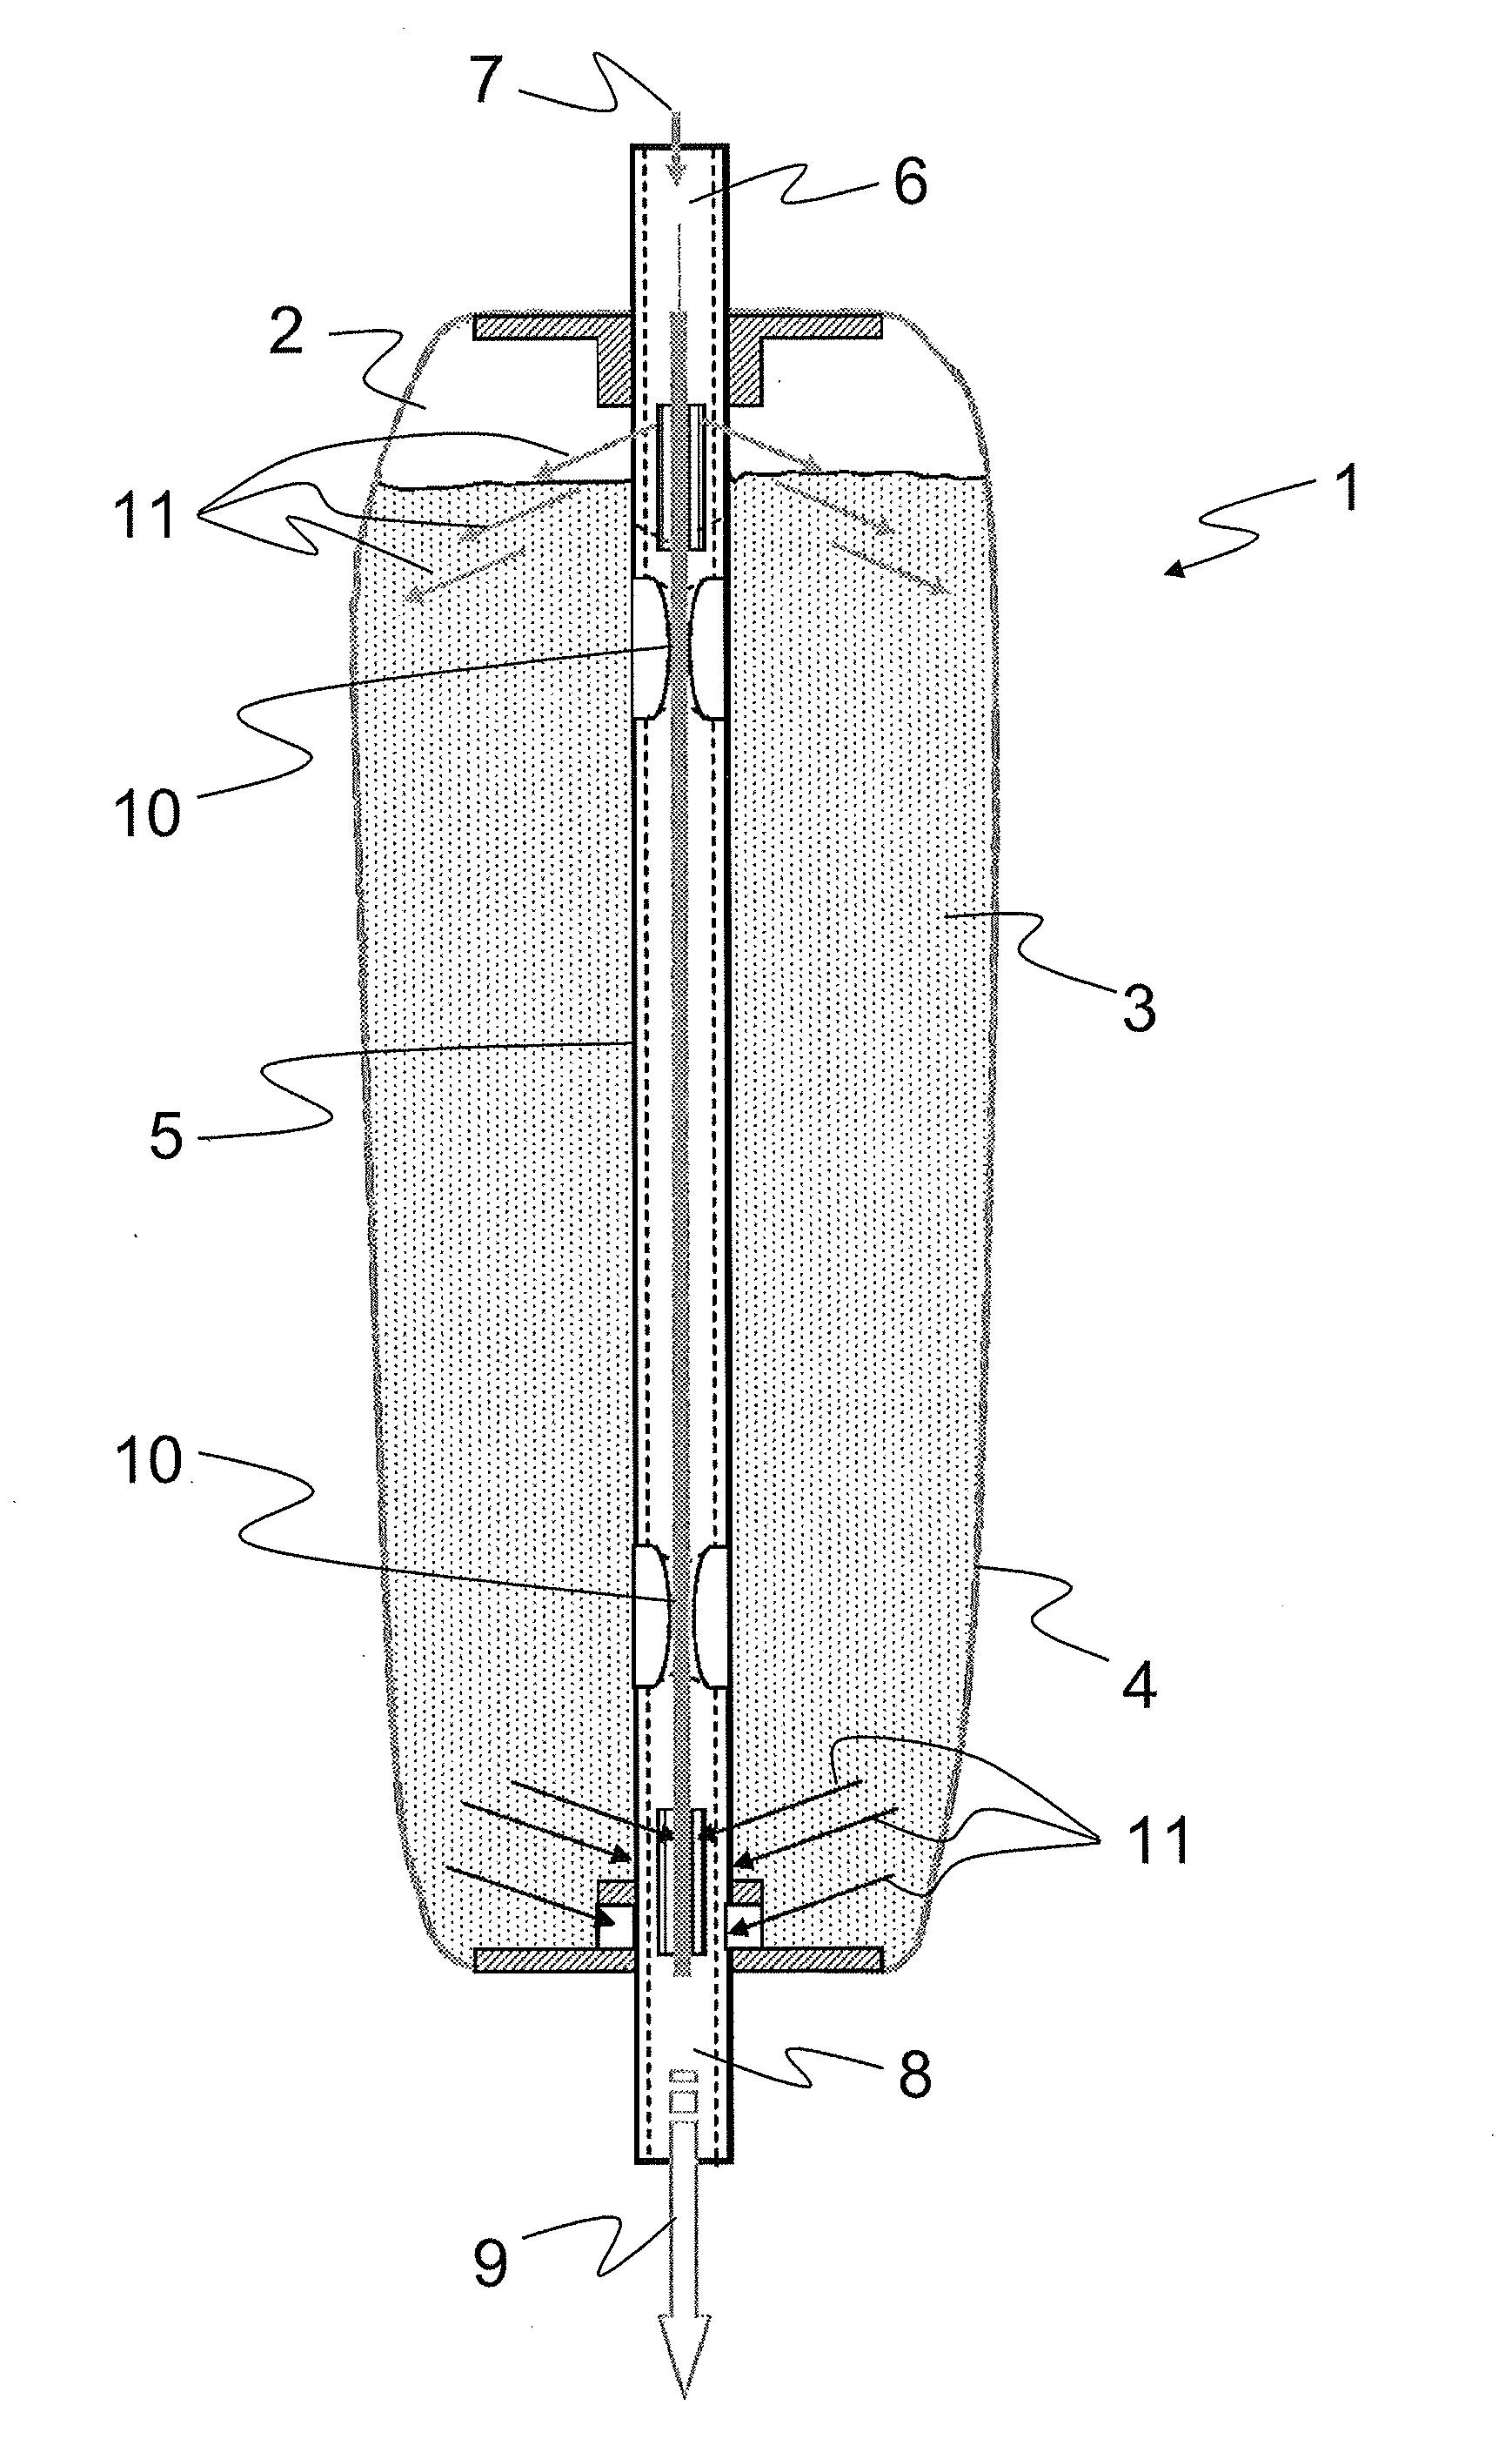 Device for preparing a solution, in particular in or on a dialysis machine